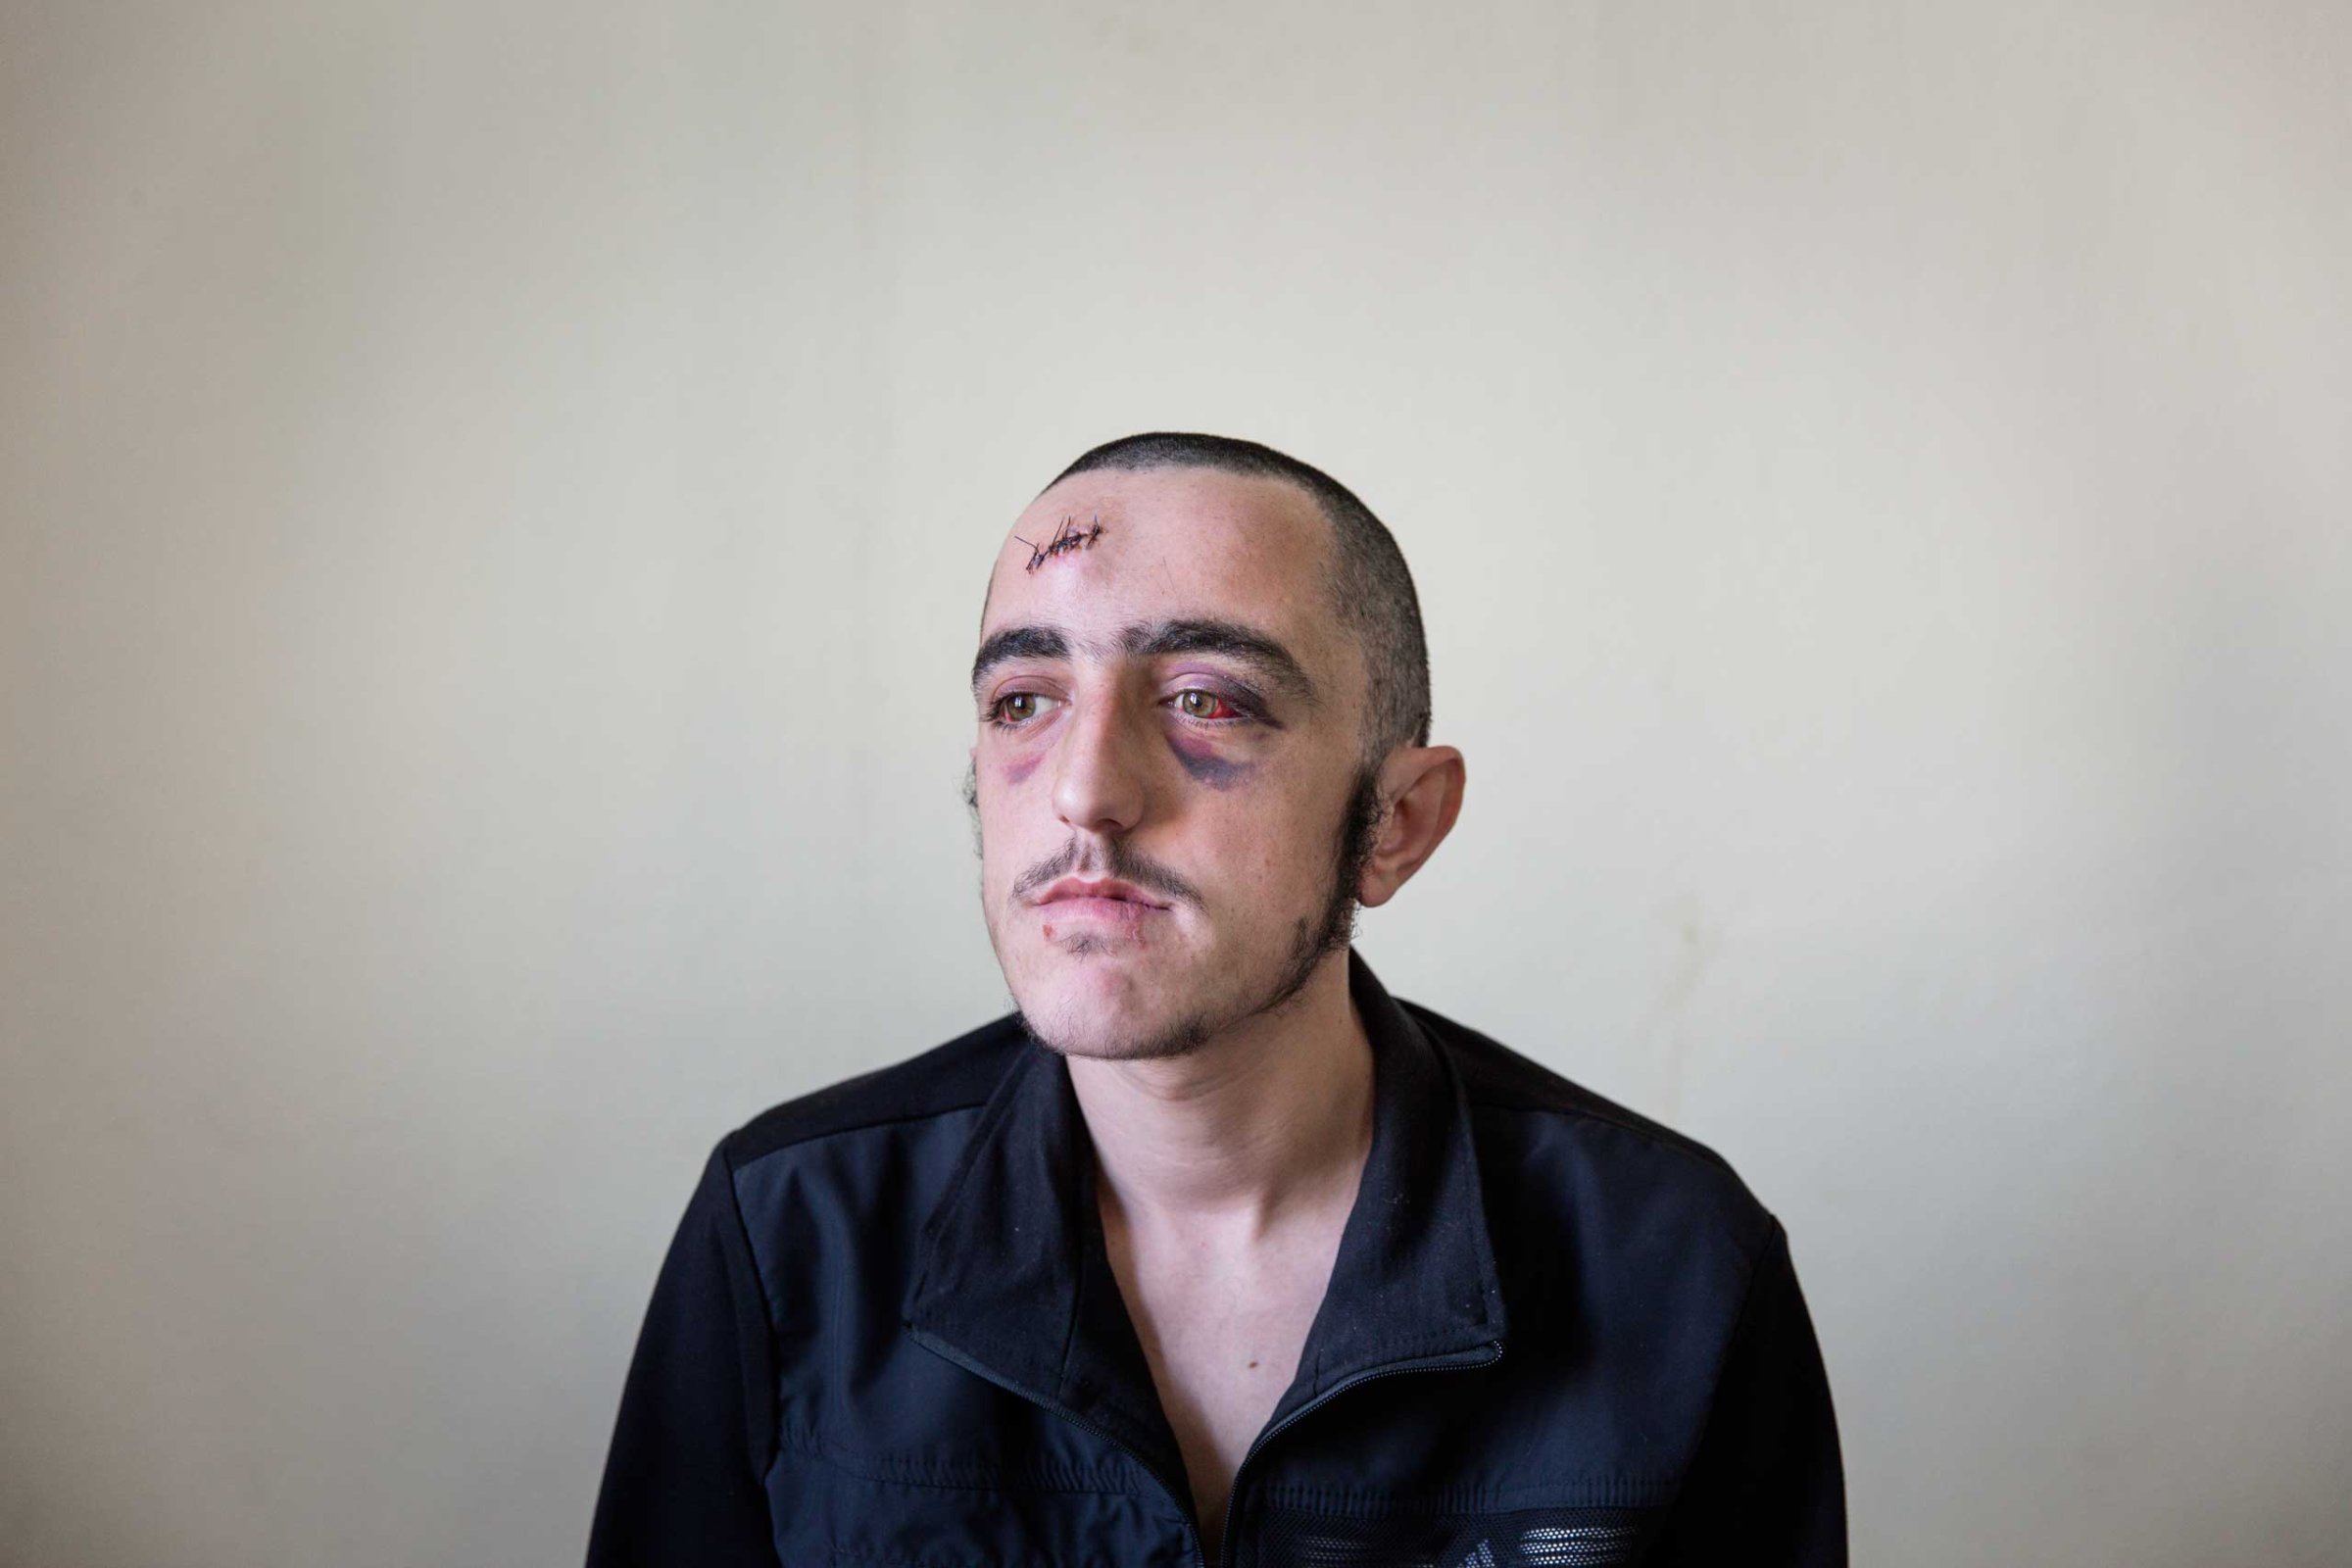 19-year-old Syrian rebel fighter Mamar Obein sits for a portrait at a small medical clinic inside Turkey where he was being treated for a head injury after he was hit by debris in what he said was a drone attack.